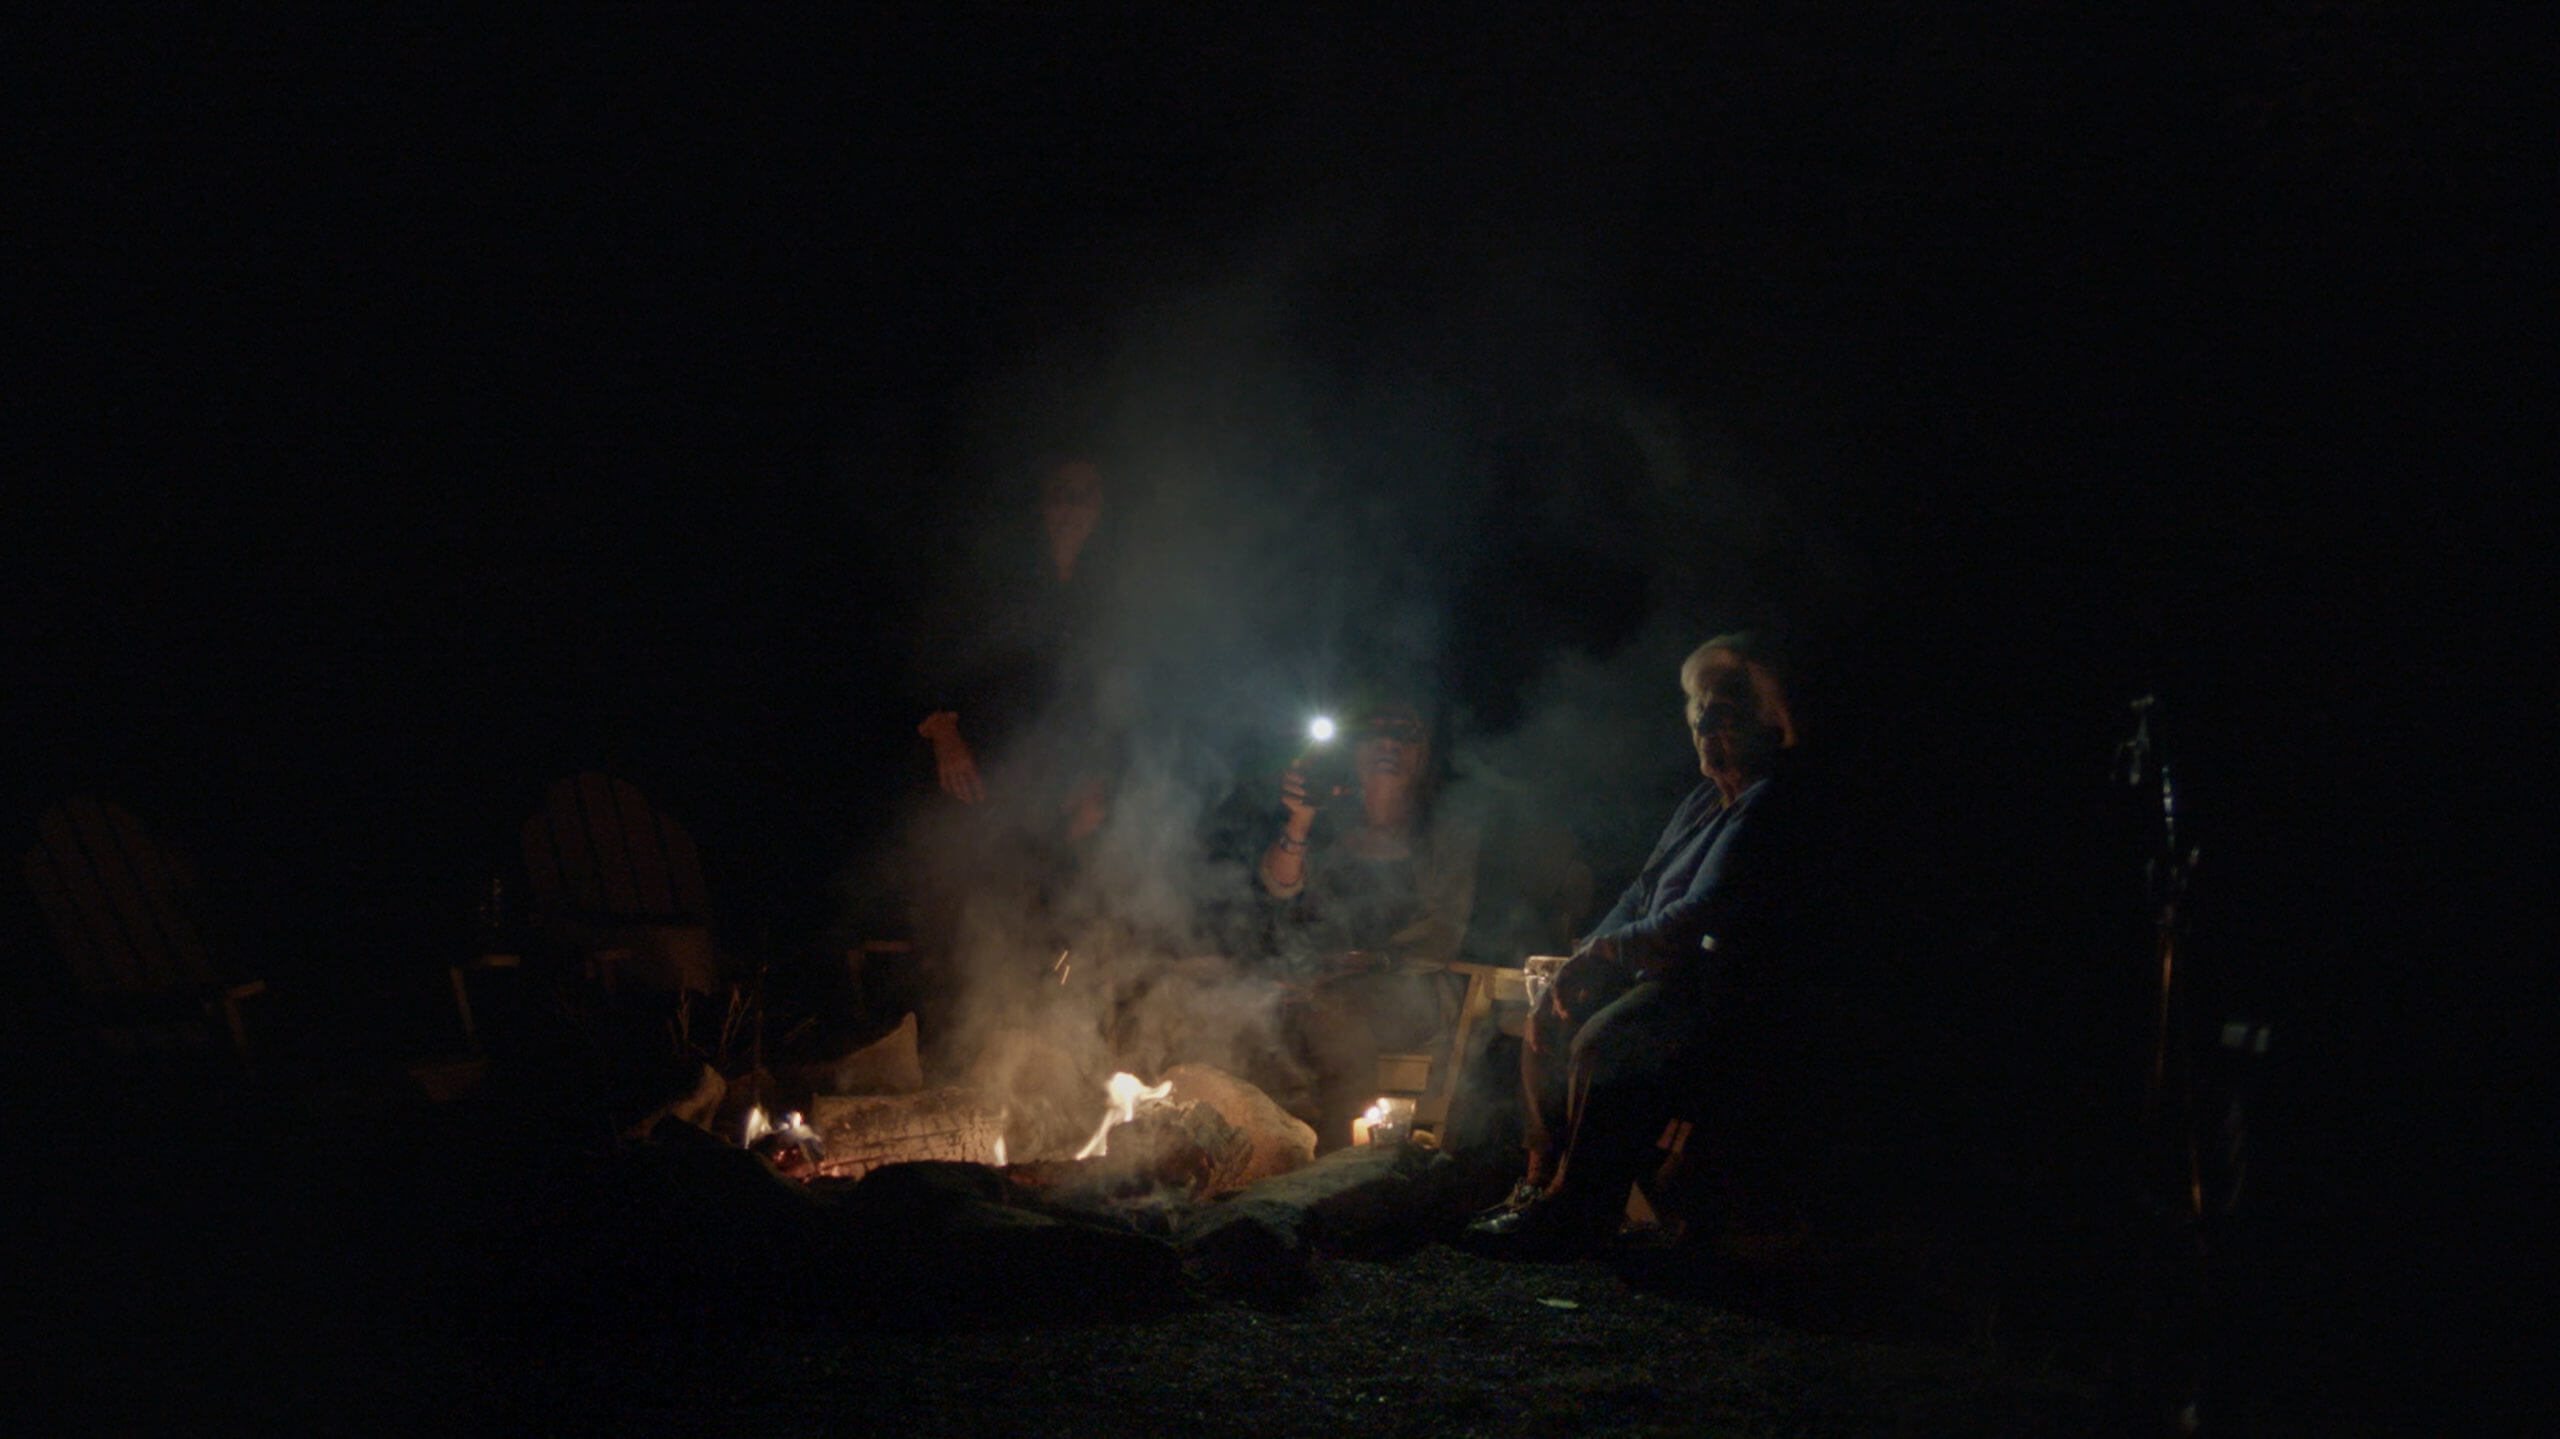 Three woman are gathered around a campfire at night. The grandmother is looking off into the distance, the mother is holding a flashlight, and the daughter's face is obscured in smoke.